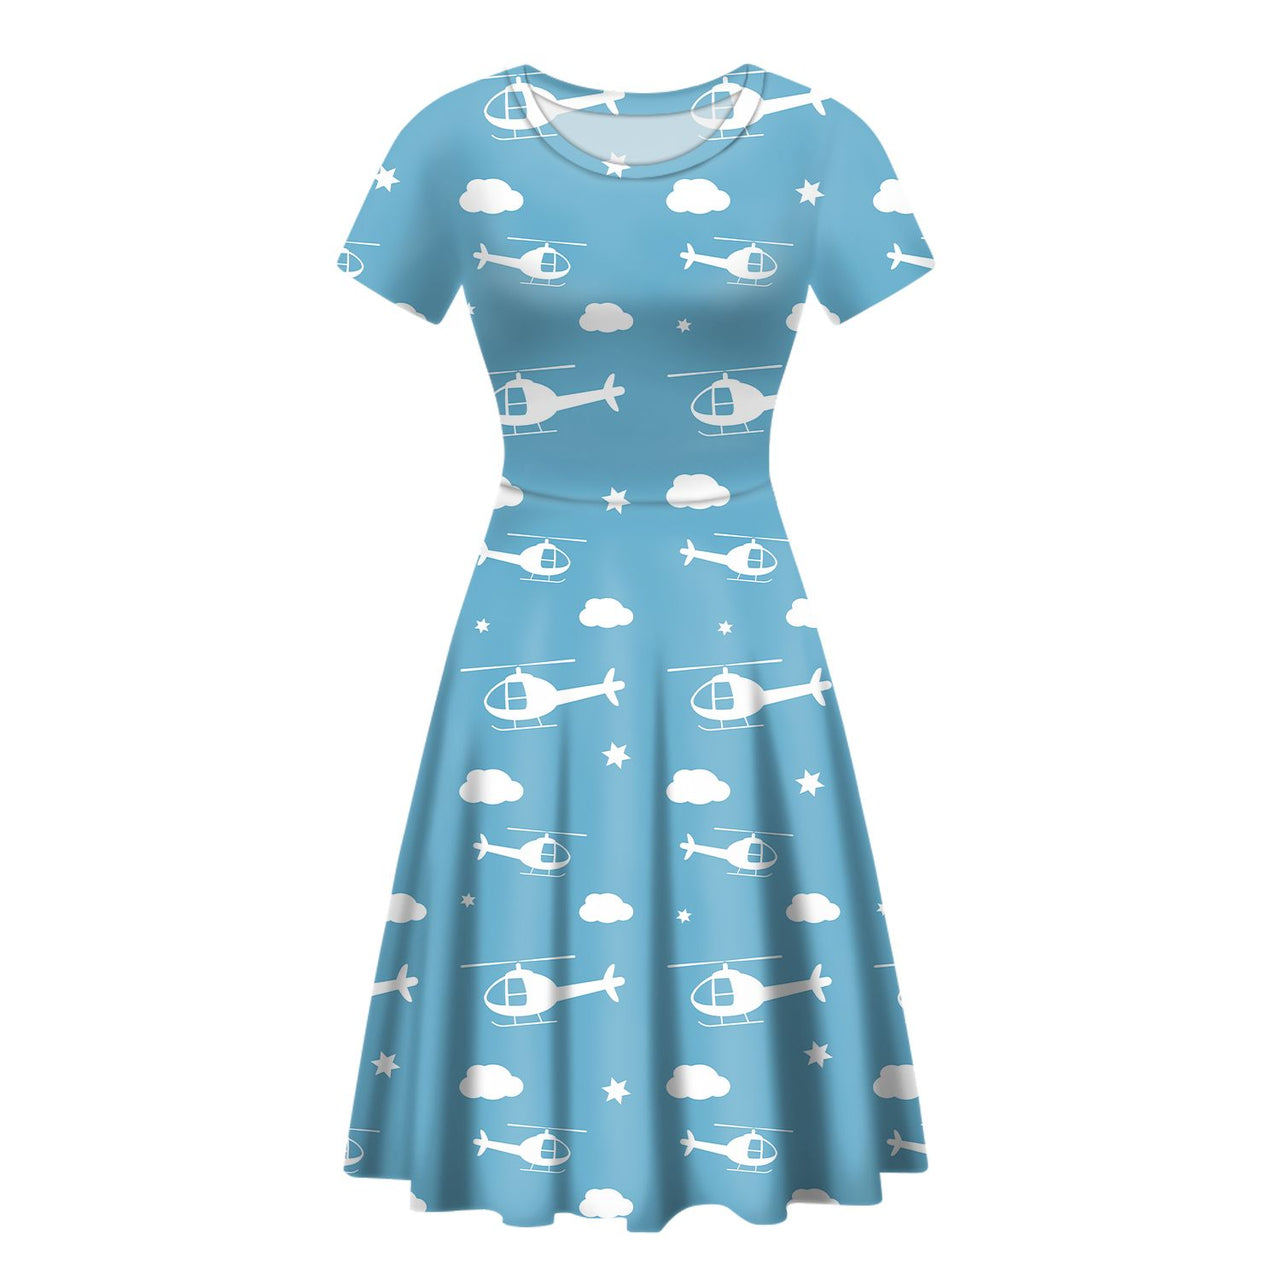 Helicopters & Clouds Designed Women Midi Dress